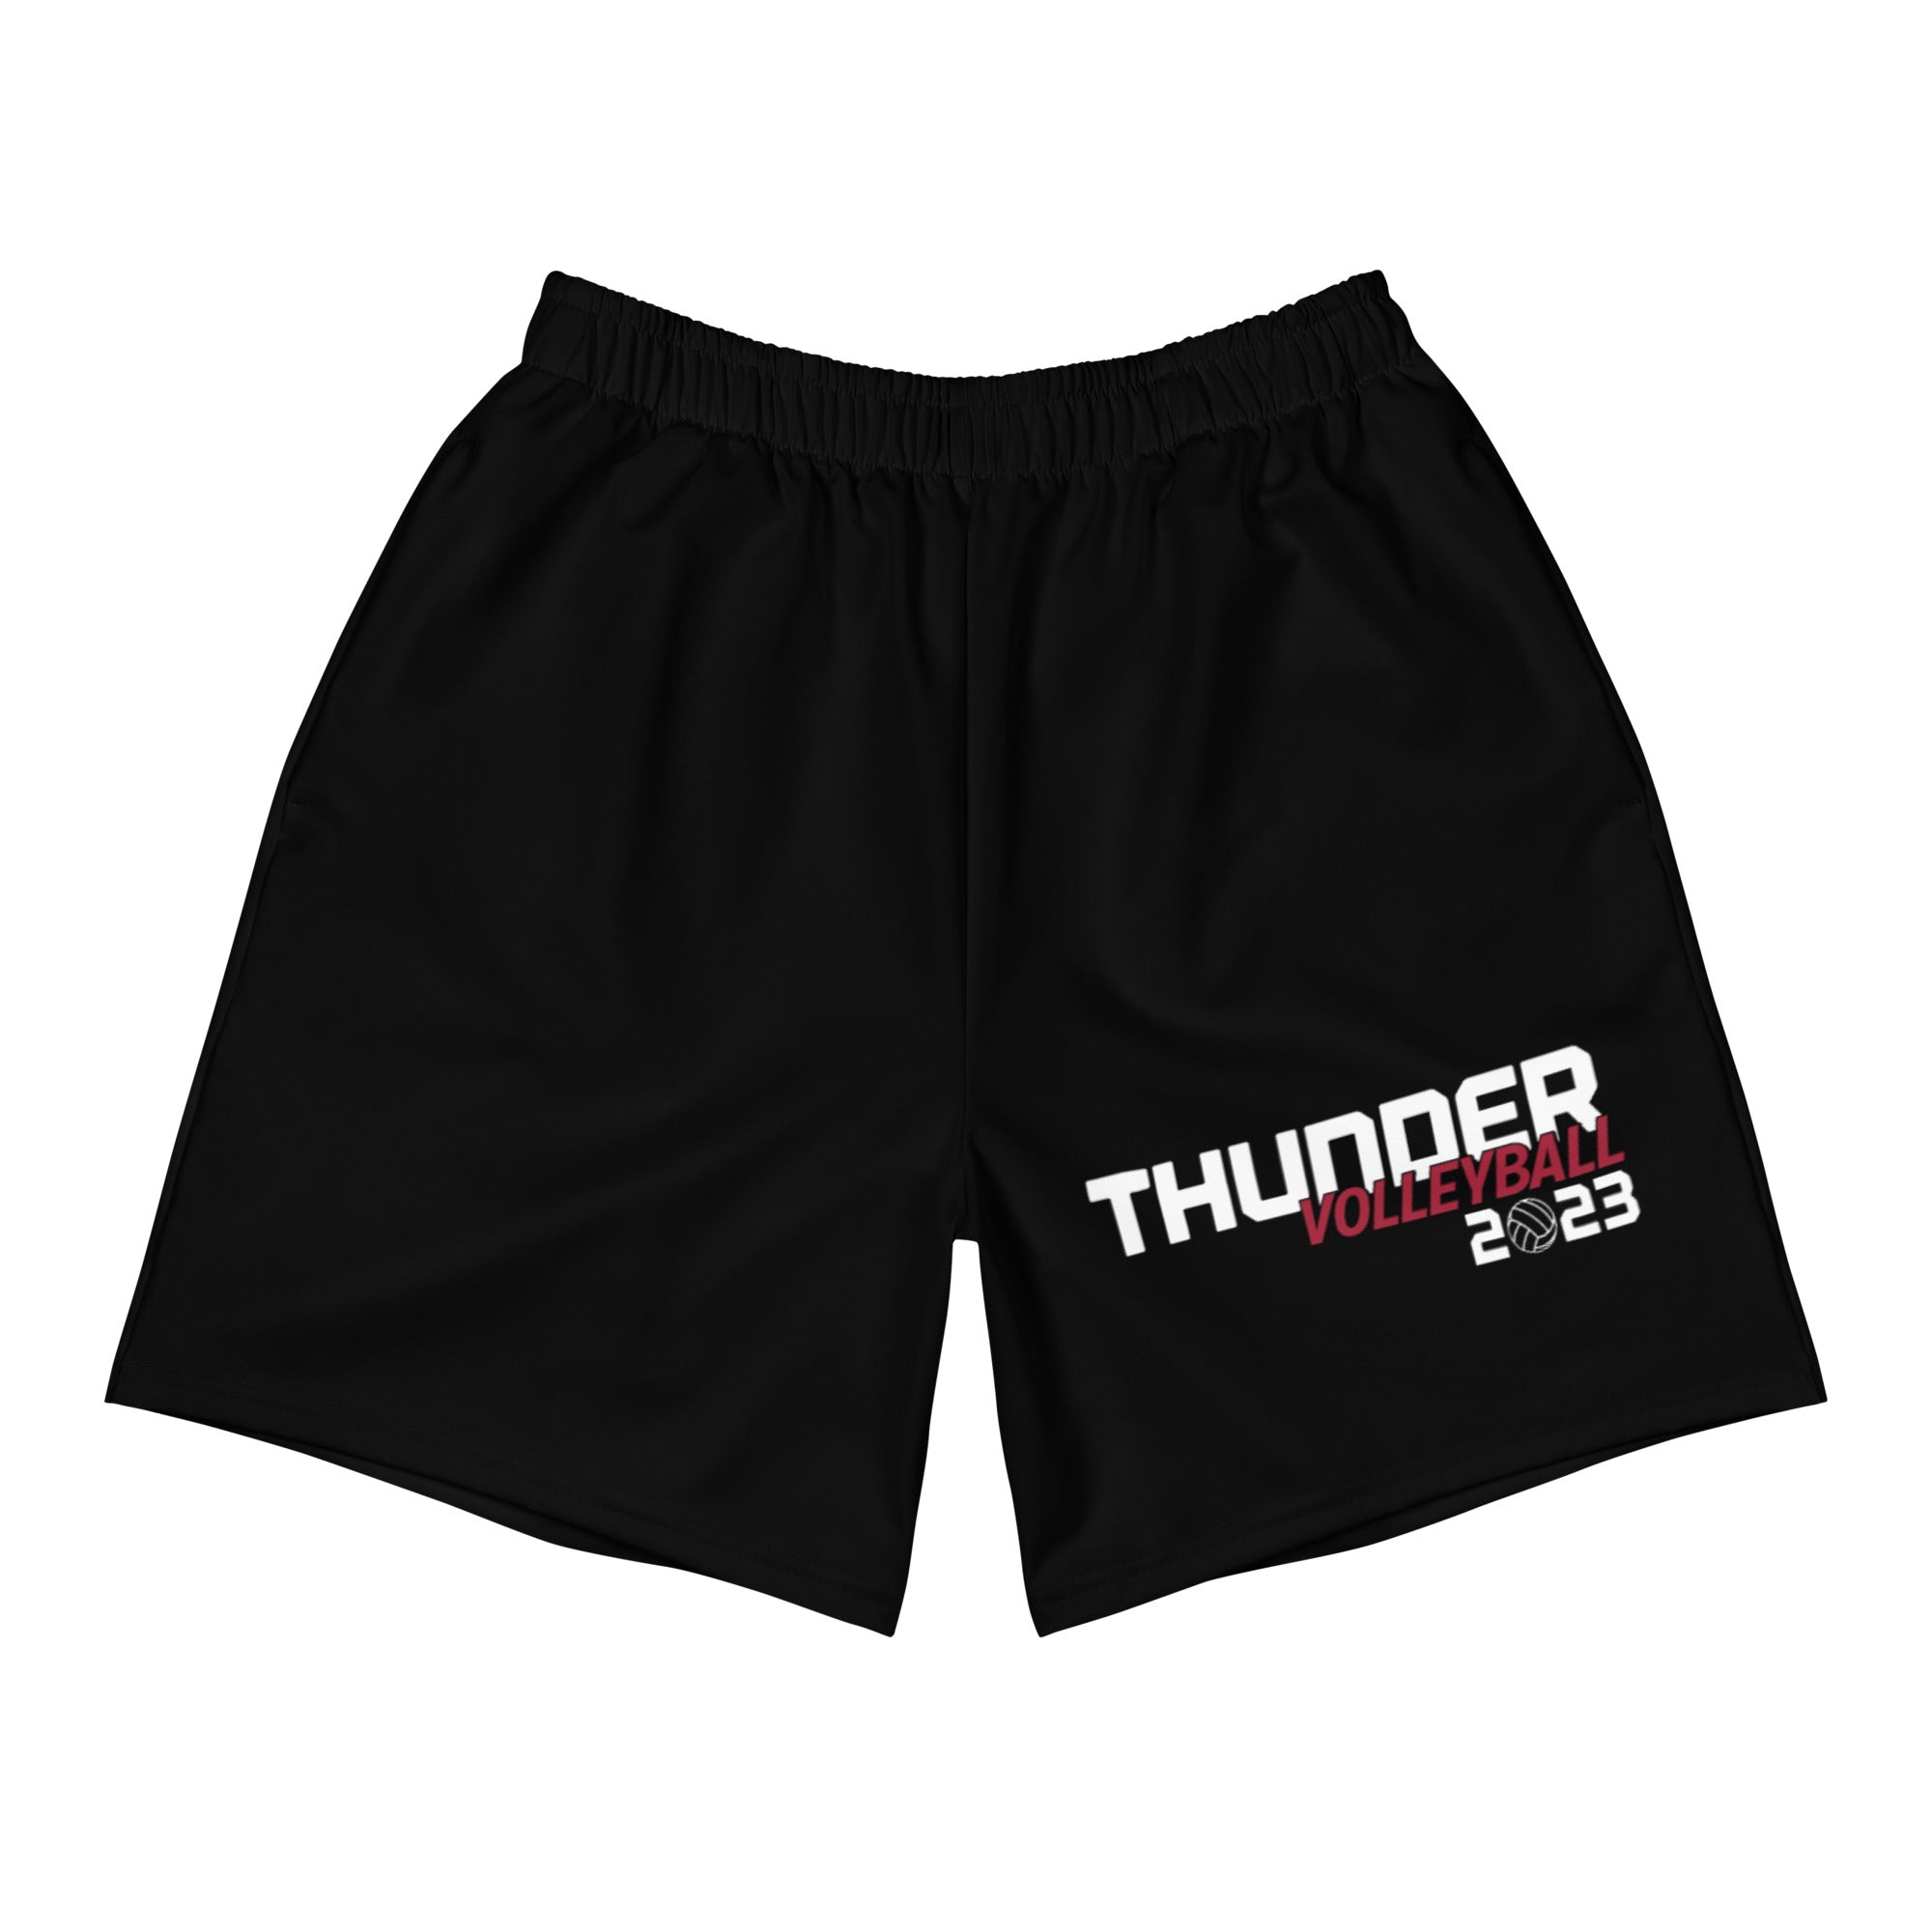 St. James Men's Volleyball Men's Athletic Long Shorts